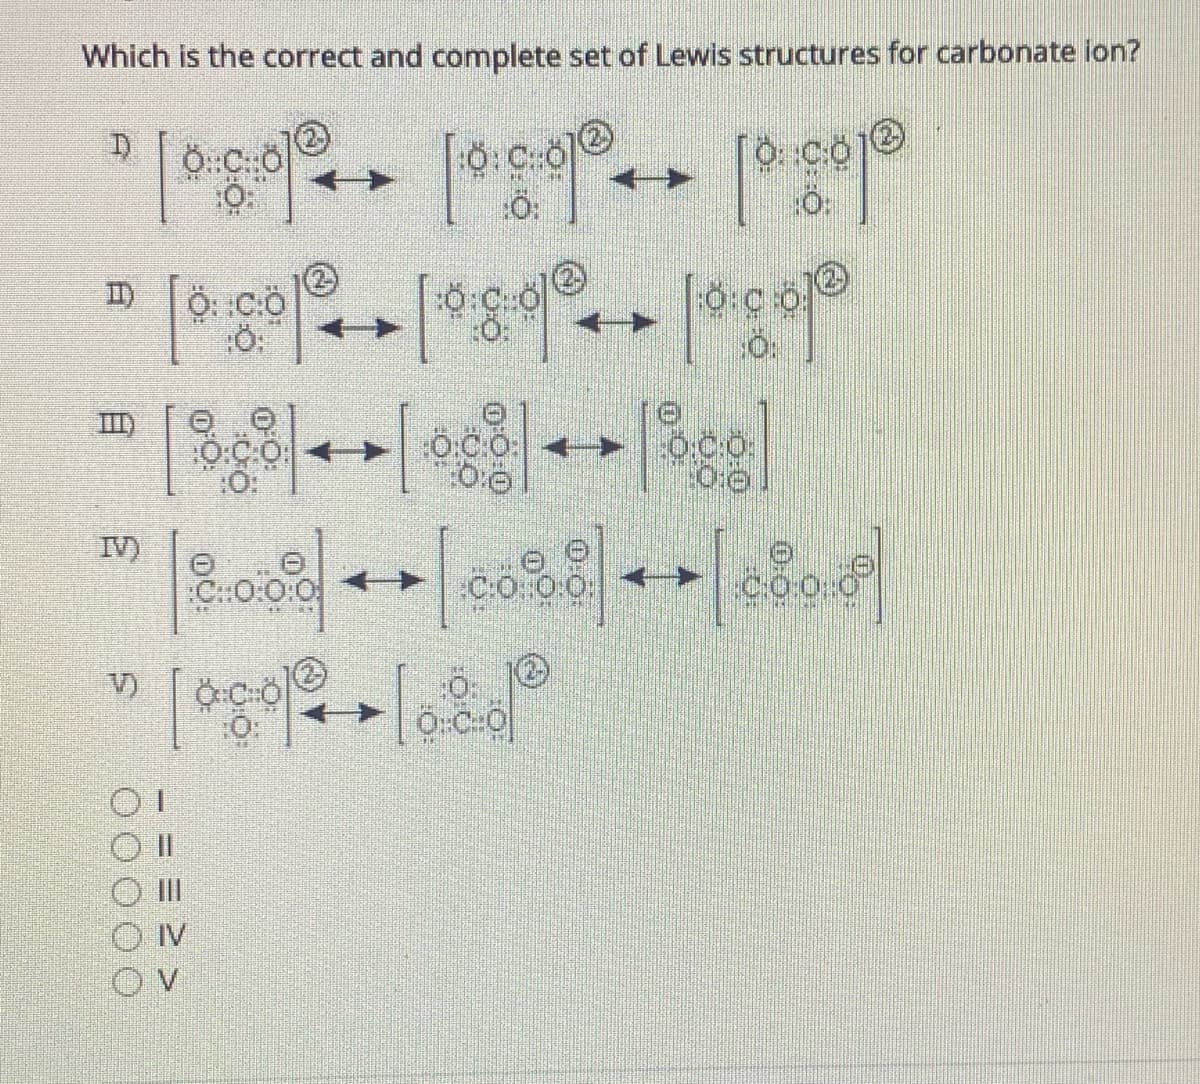 Which is the correct and complete set of Lewis structures for carbonate ion?
I)
III)
IV)
C:0:0:0
C:O 00
V)
IV
白
